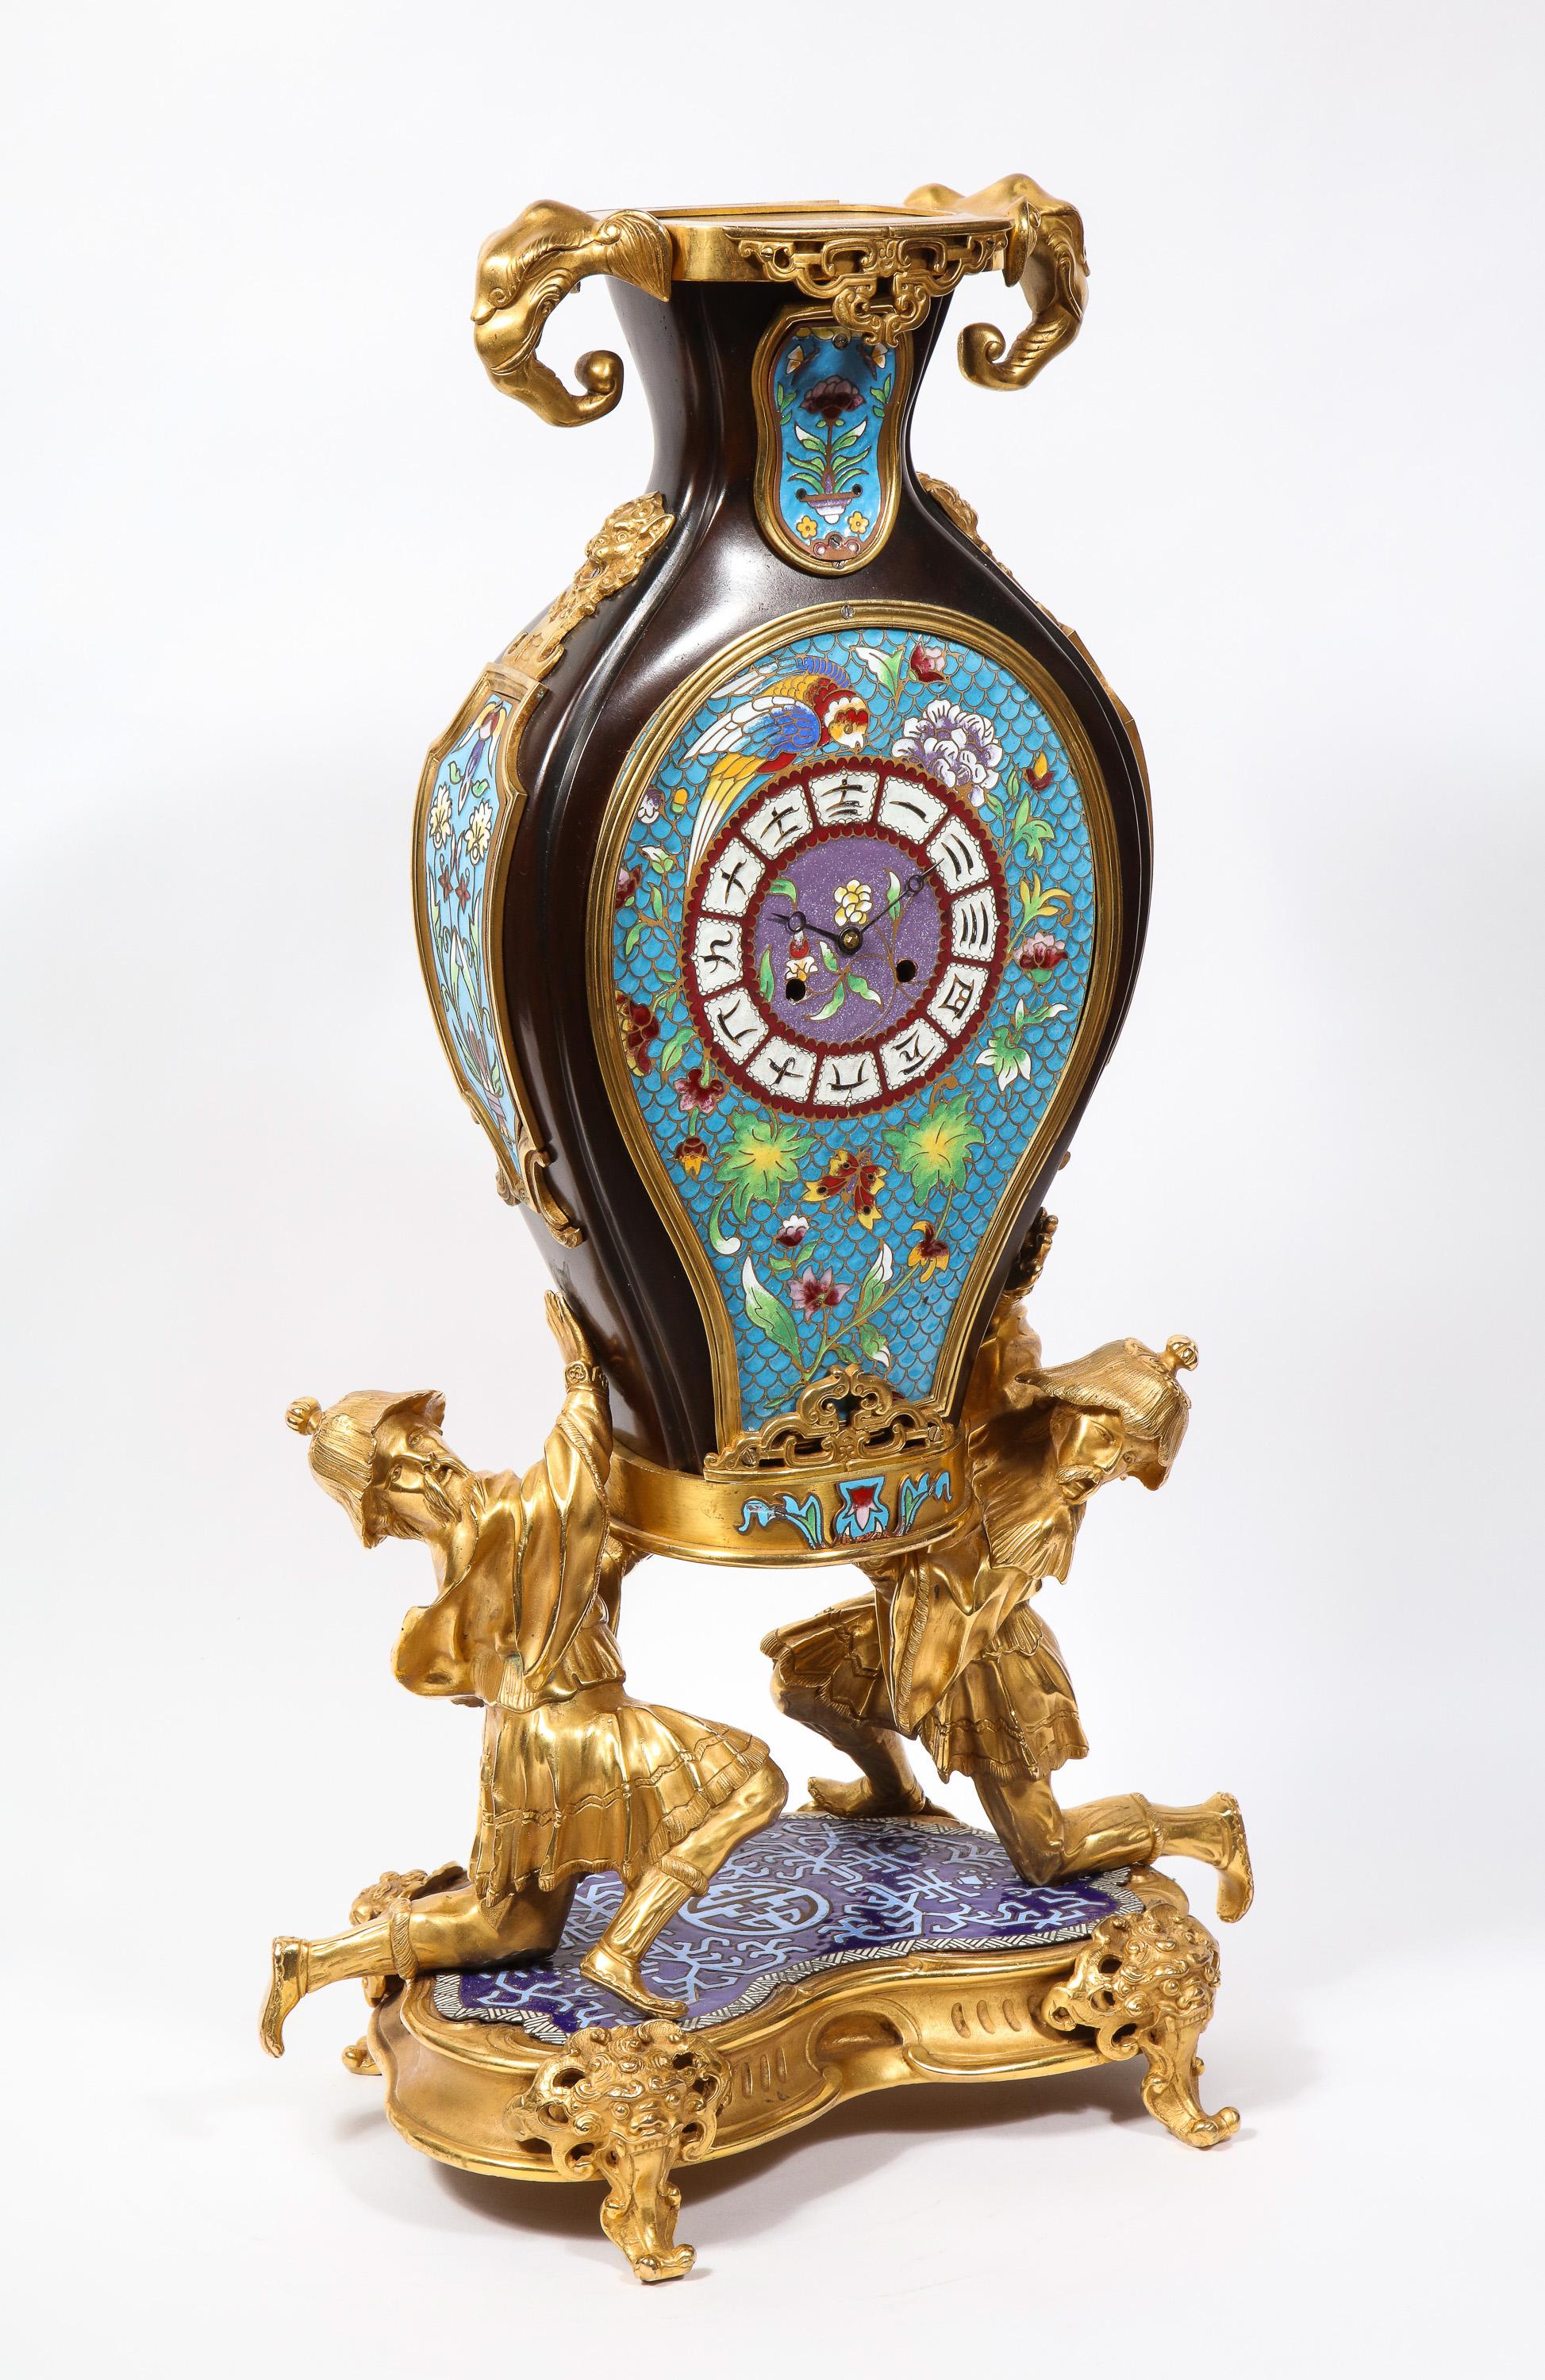 A French Japonisme Chinoiserie Ormolu, patinated bronze, and cloisonne enamel mantel clock, Attributed to Escalier De Cristal and Edouard Lievre, Paris, late 19th century.

Formed as a cloisonne enameled vase, with two Chinoiserie bronze men